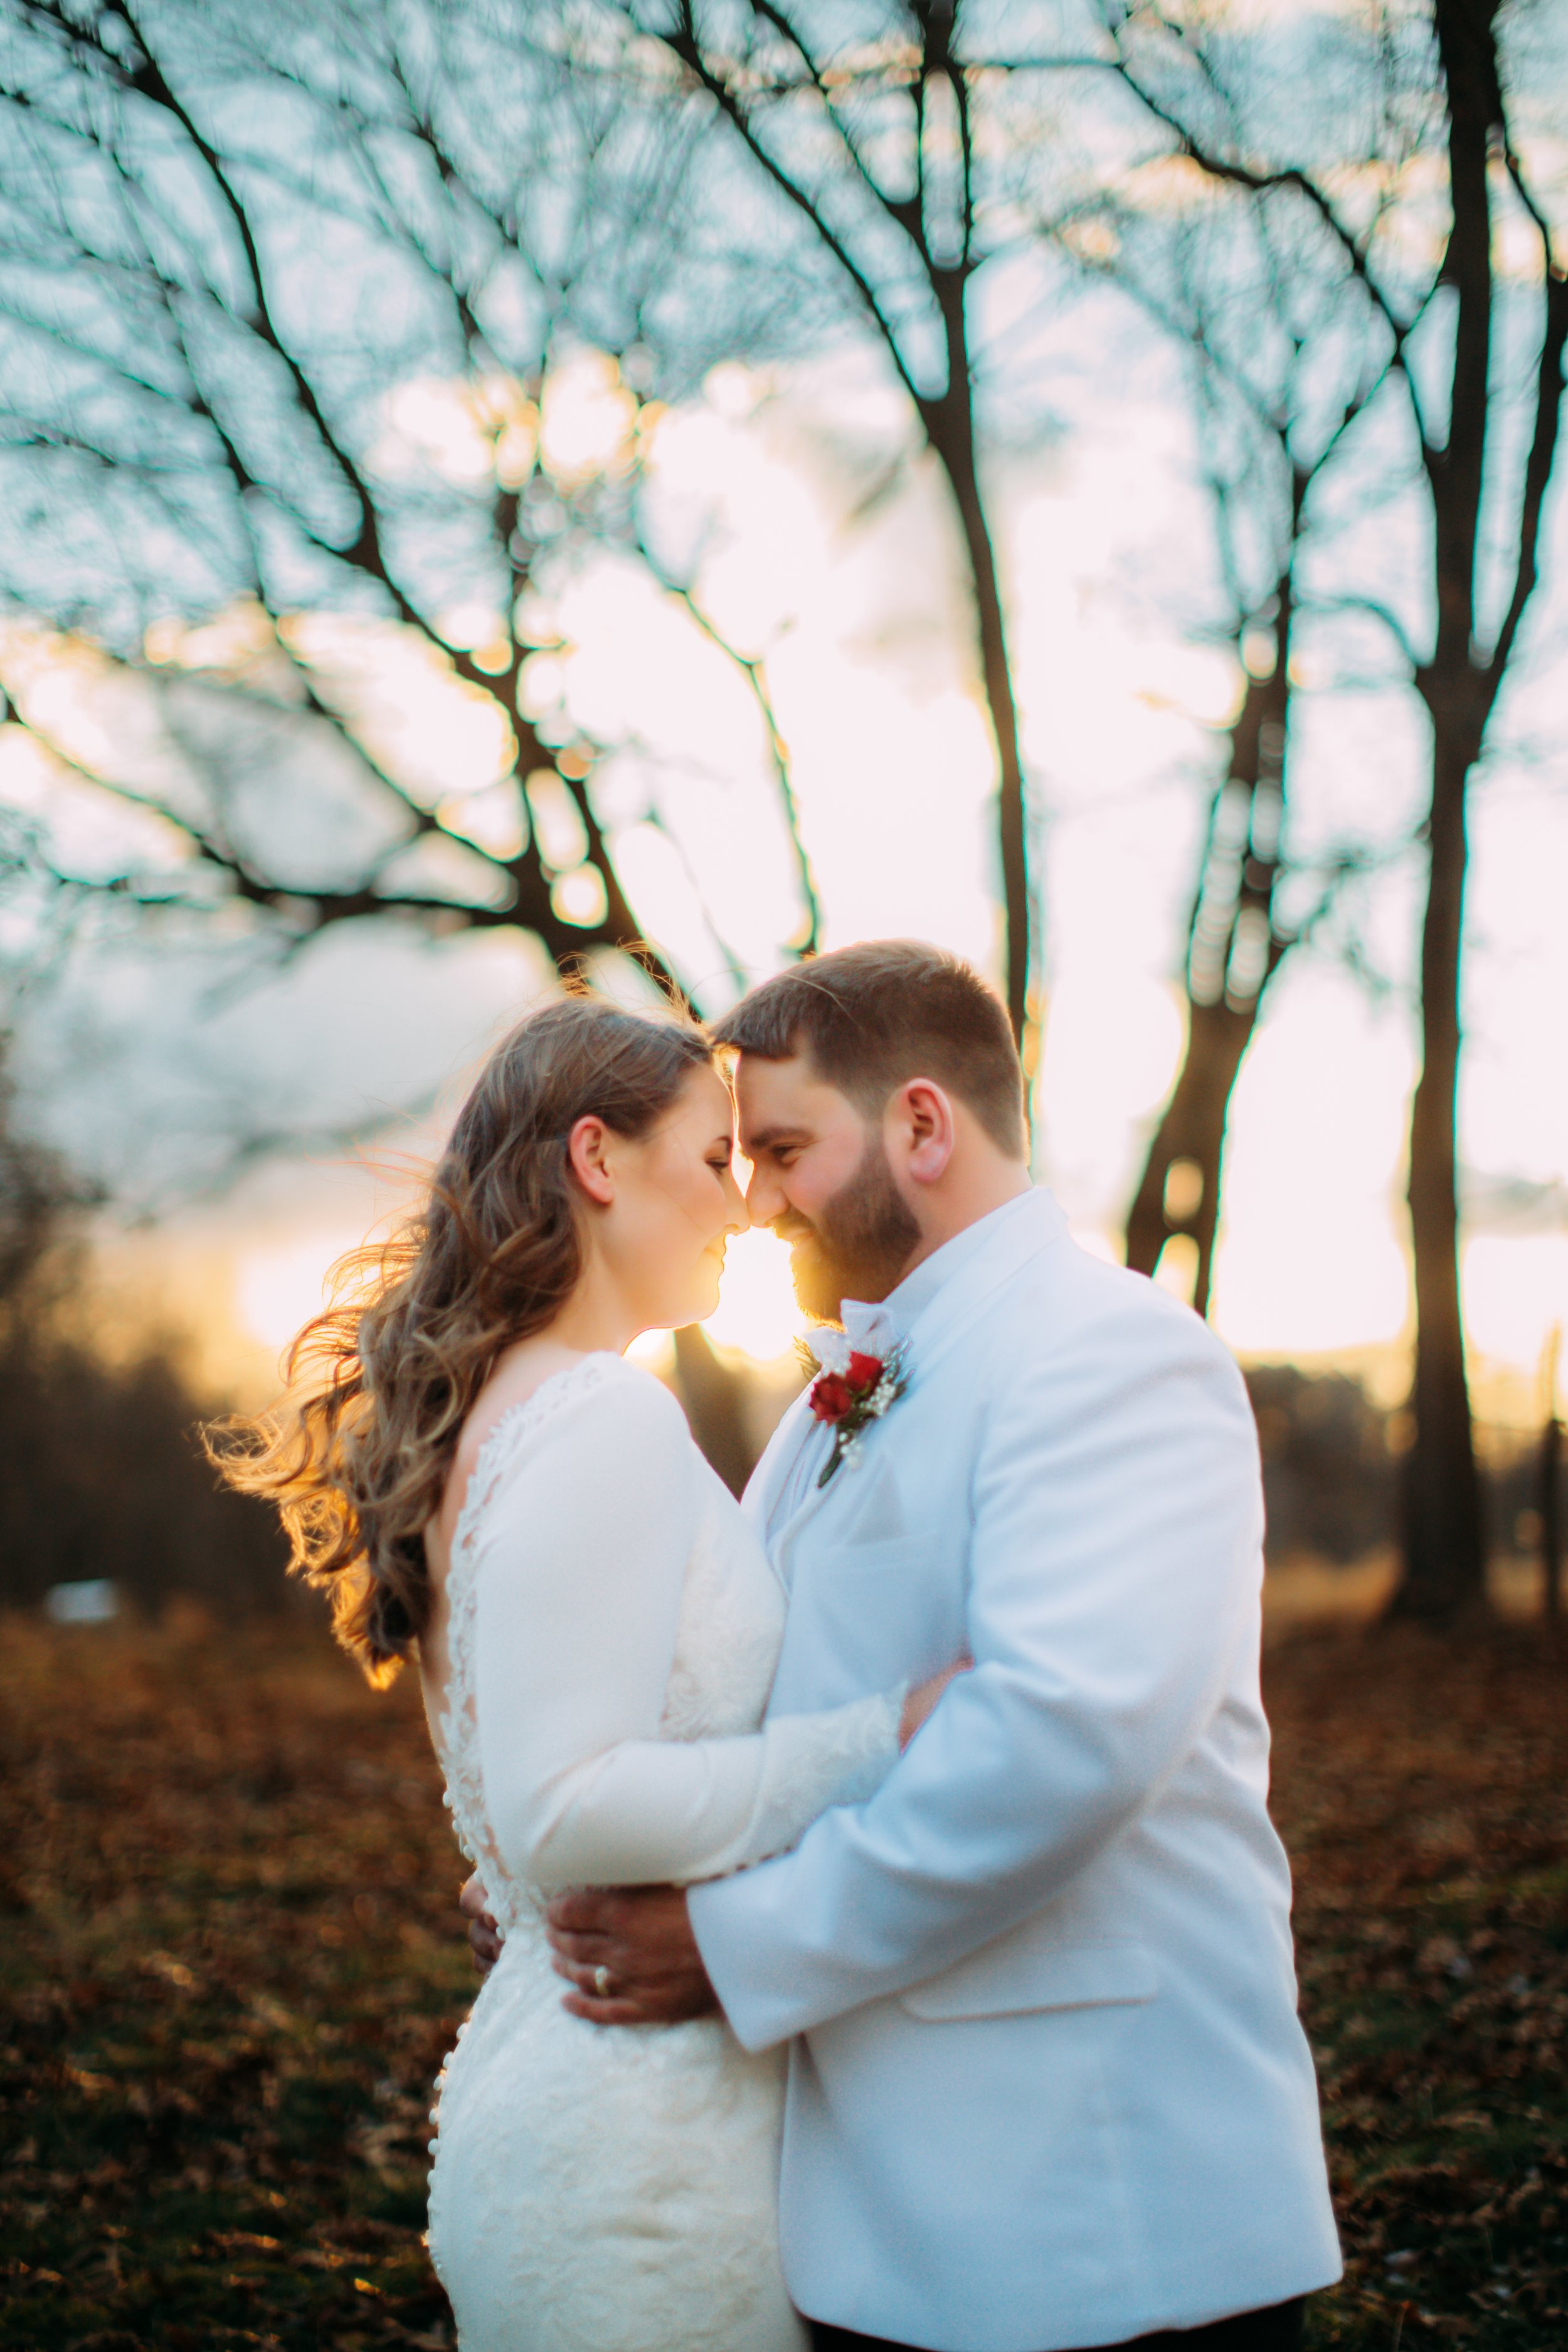  In LaSalle, Illinois a bride and groom hug with the sun setting behind them captured by Teala Ward Photography. sunset bridal pic #TealaWardPhotography #TealaWardWeddings #LaSalleWedding #churchwedding #Illinoisweddingphotographer #LaSalle,IL 